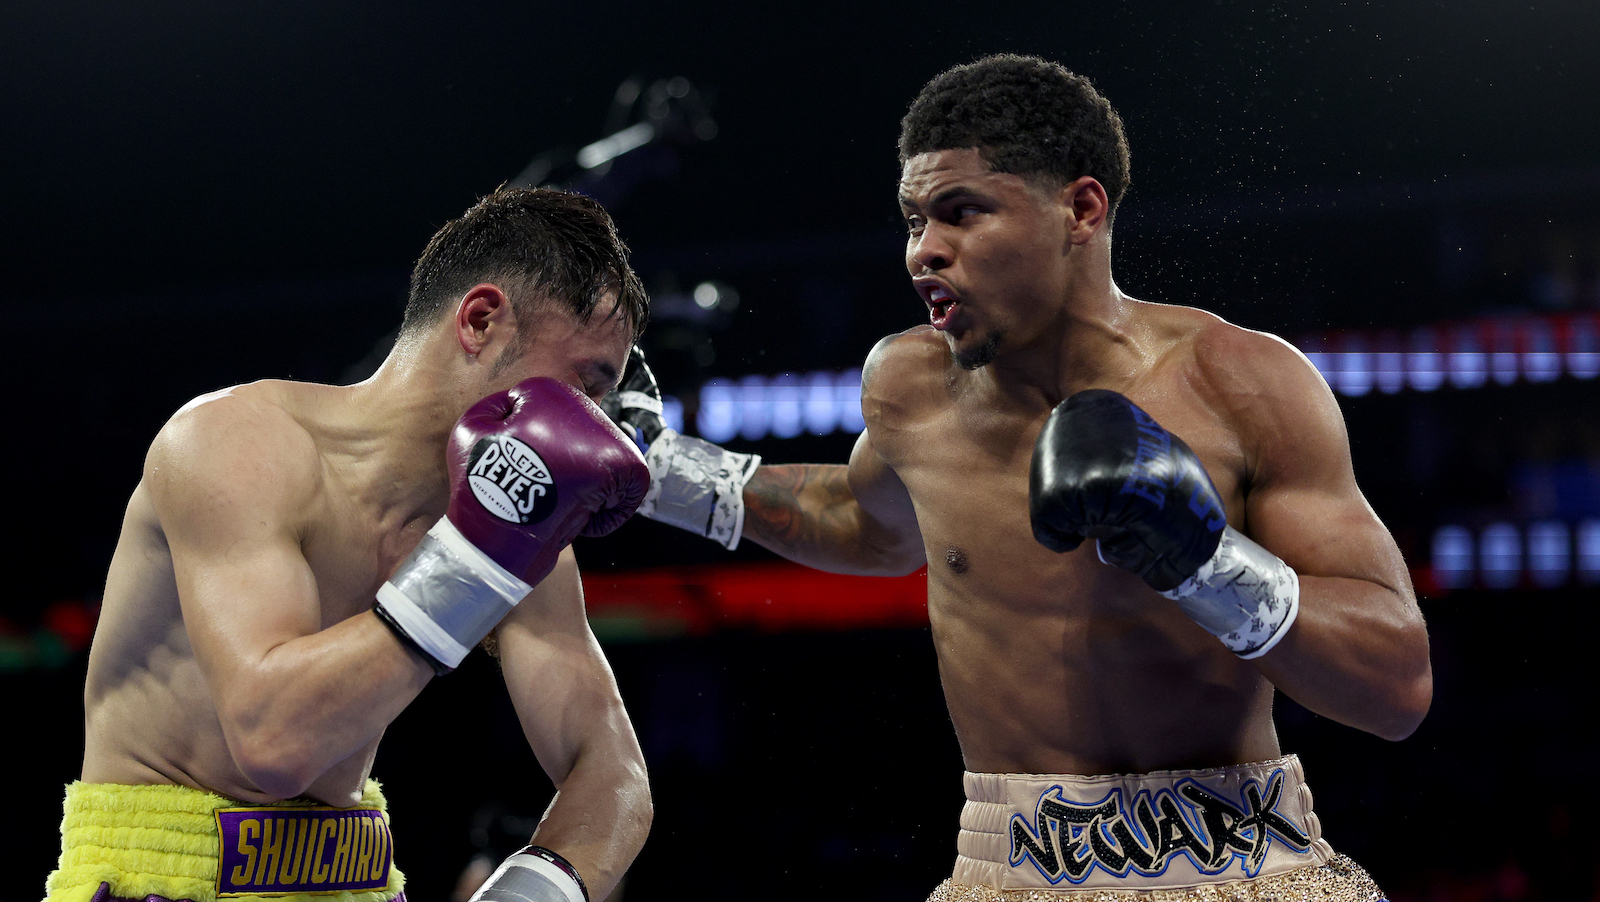 NEWARK, NEW JERSEY - APRIL 08: Shuichiro Yoshino of Japan and Shakur Stevenson of the United States exchange punches during their WBC Lightweight Final Eliminator match at Prudential Center on April 08, 2023 in Newark, New Jersey.